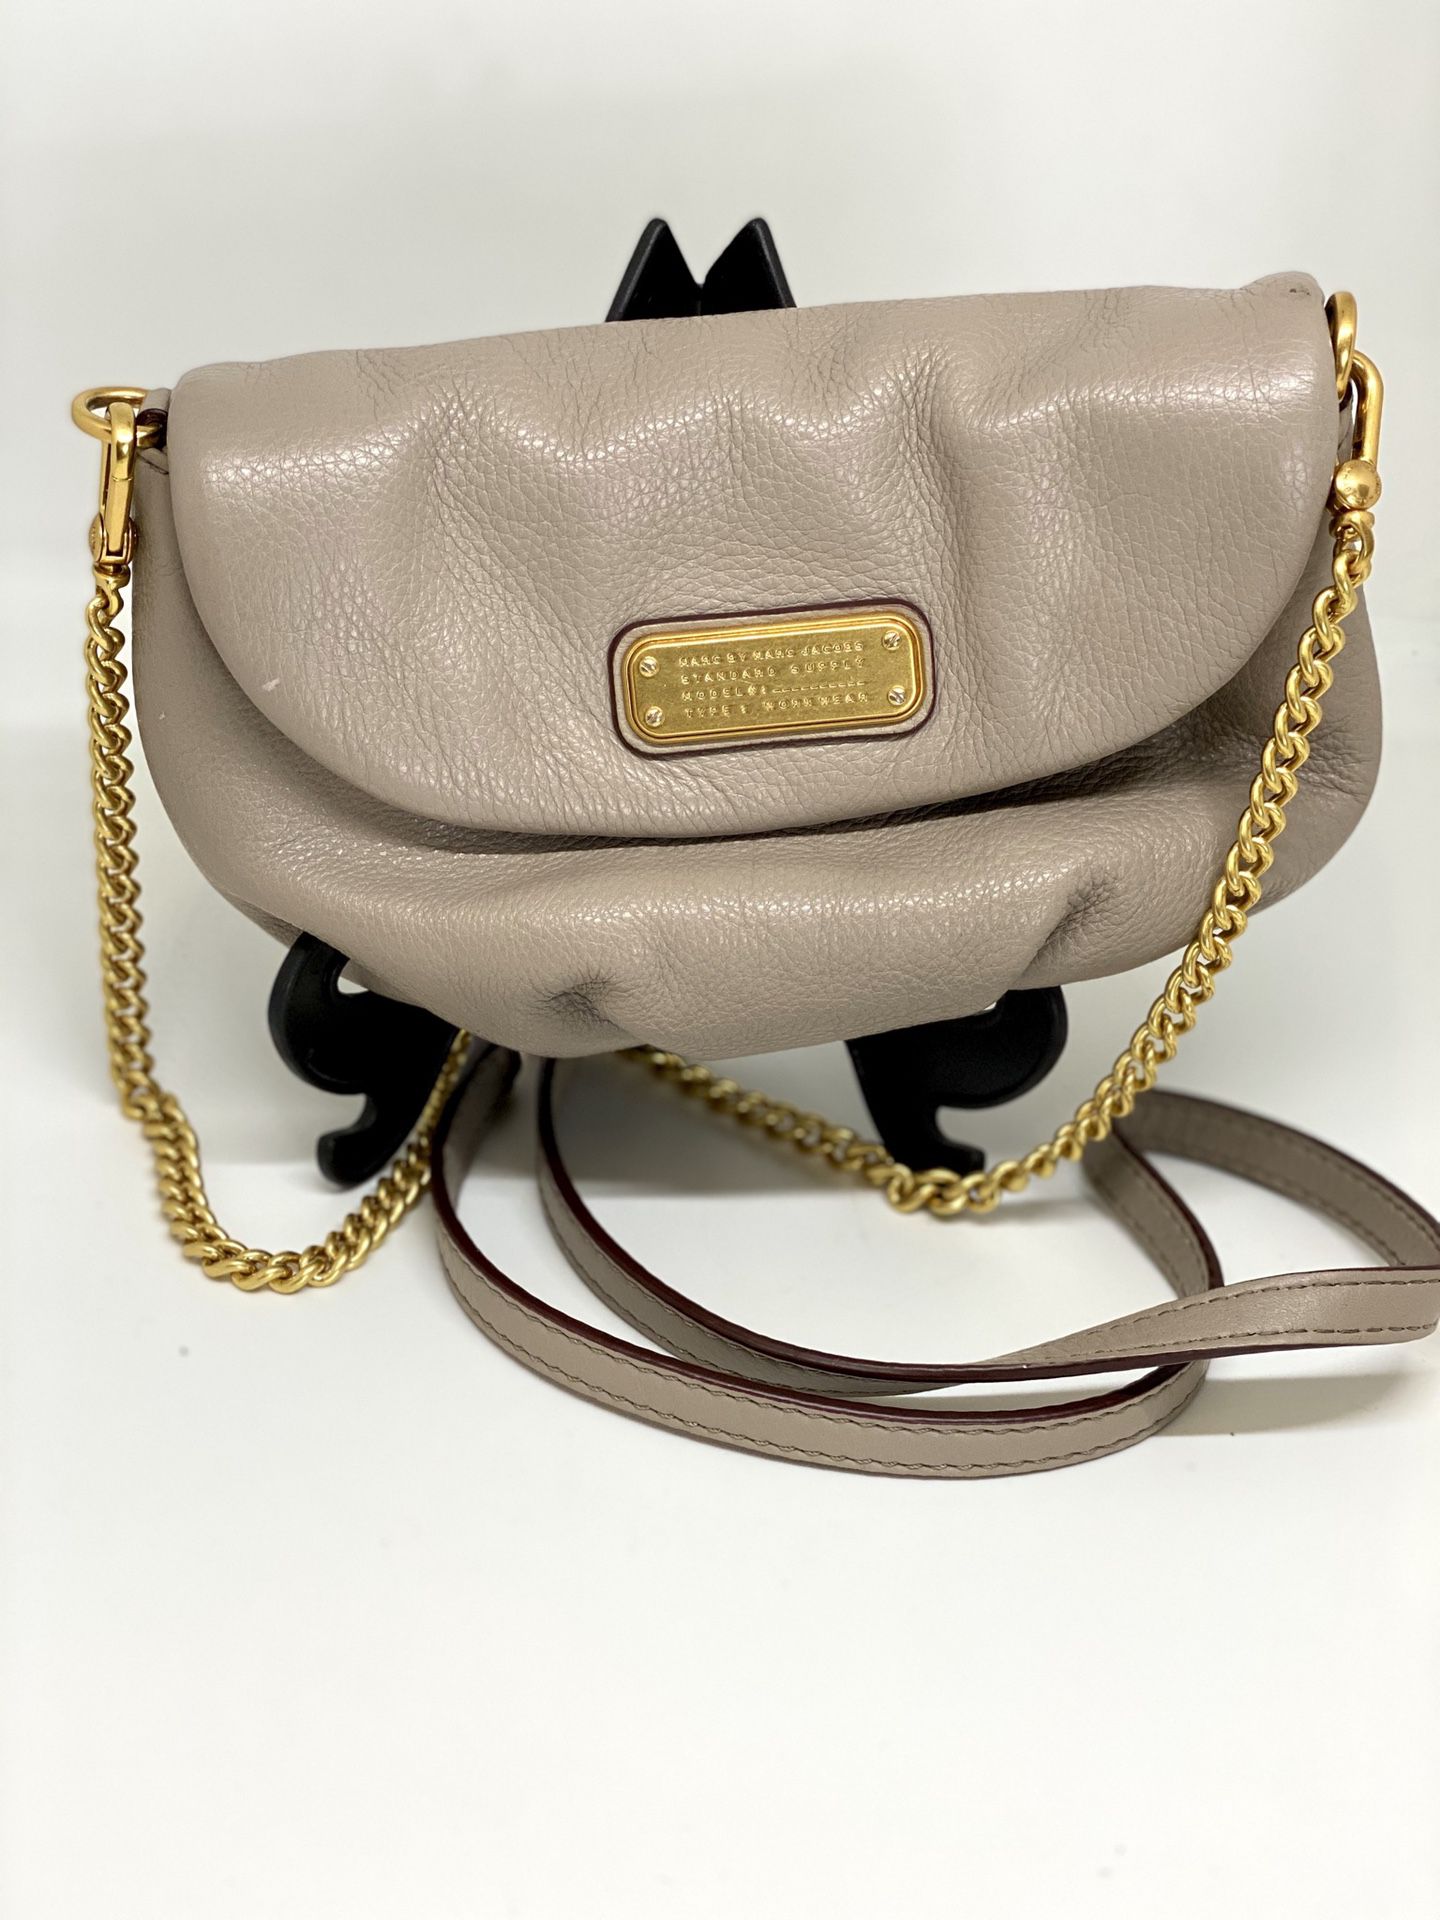 MARC BY MARC JACOBS NEW Q KARLIE BAG